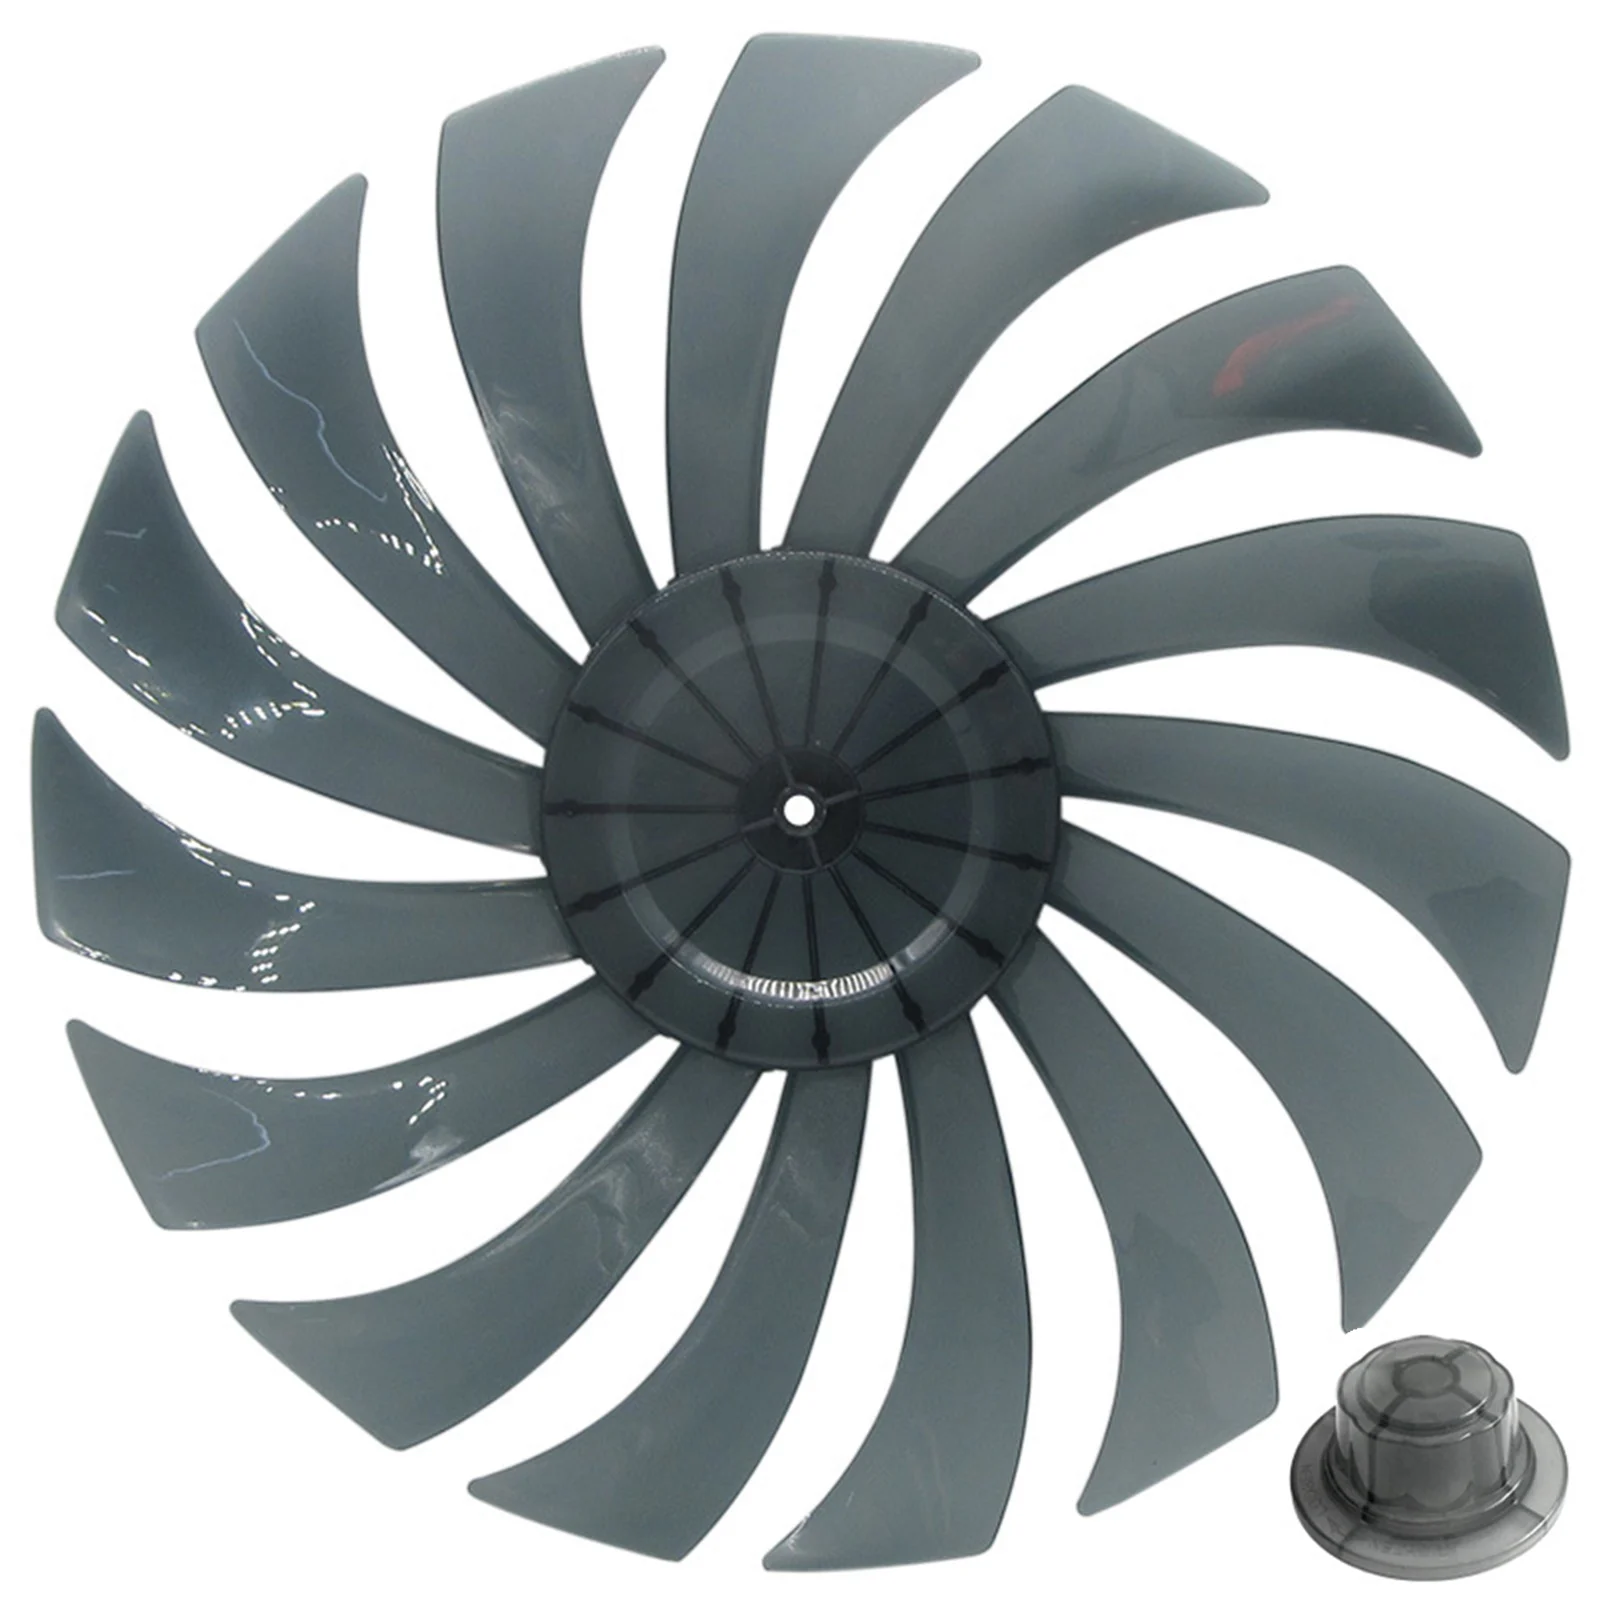 

Hassle Free Maintenance Easy to Clean and Remove Enhance the Longevity of Your Fan with these Replacement Blades